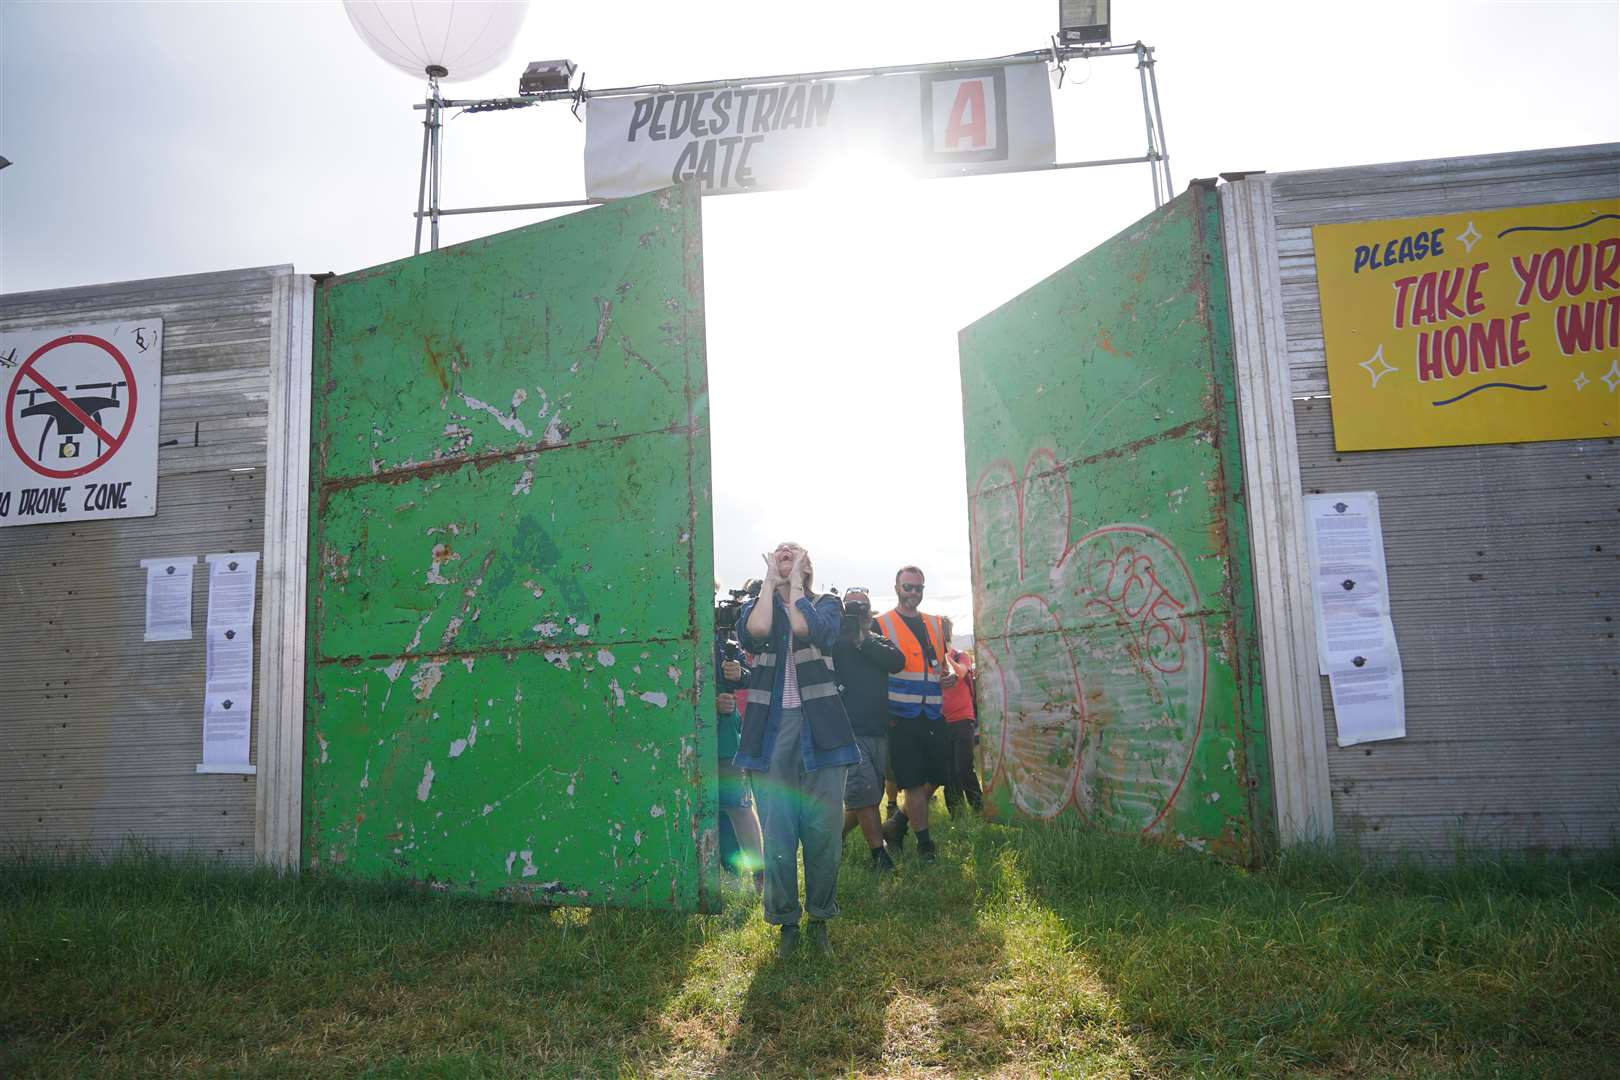 Emily Eavis opens the gates on the first day of the Glastonbury Festival at Worthy Farm in Somerset (Yui Mok/PA)